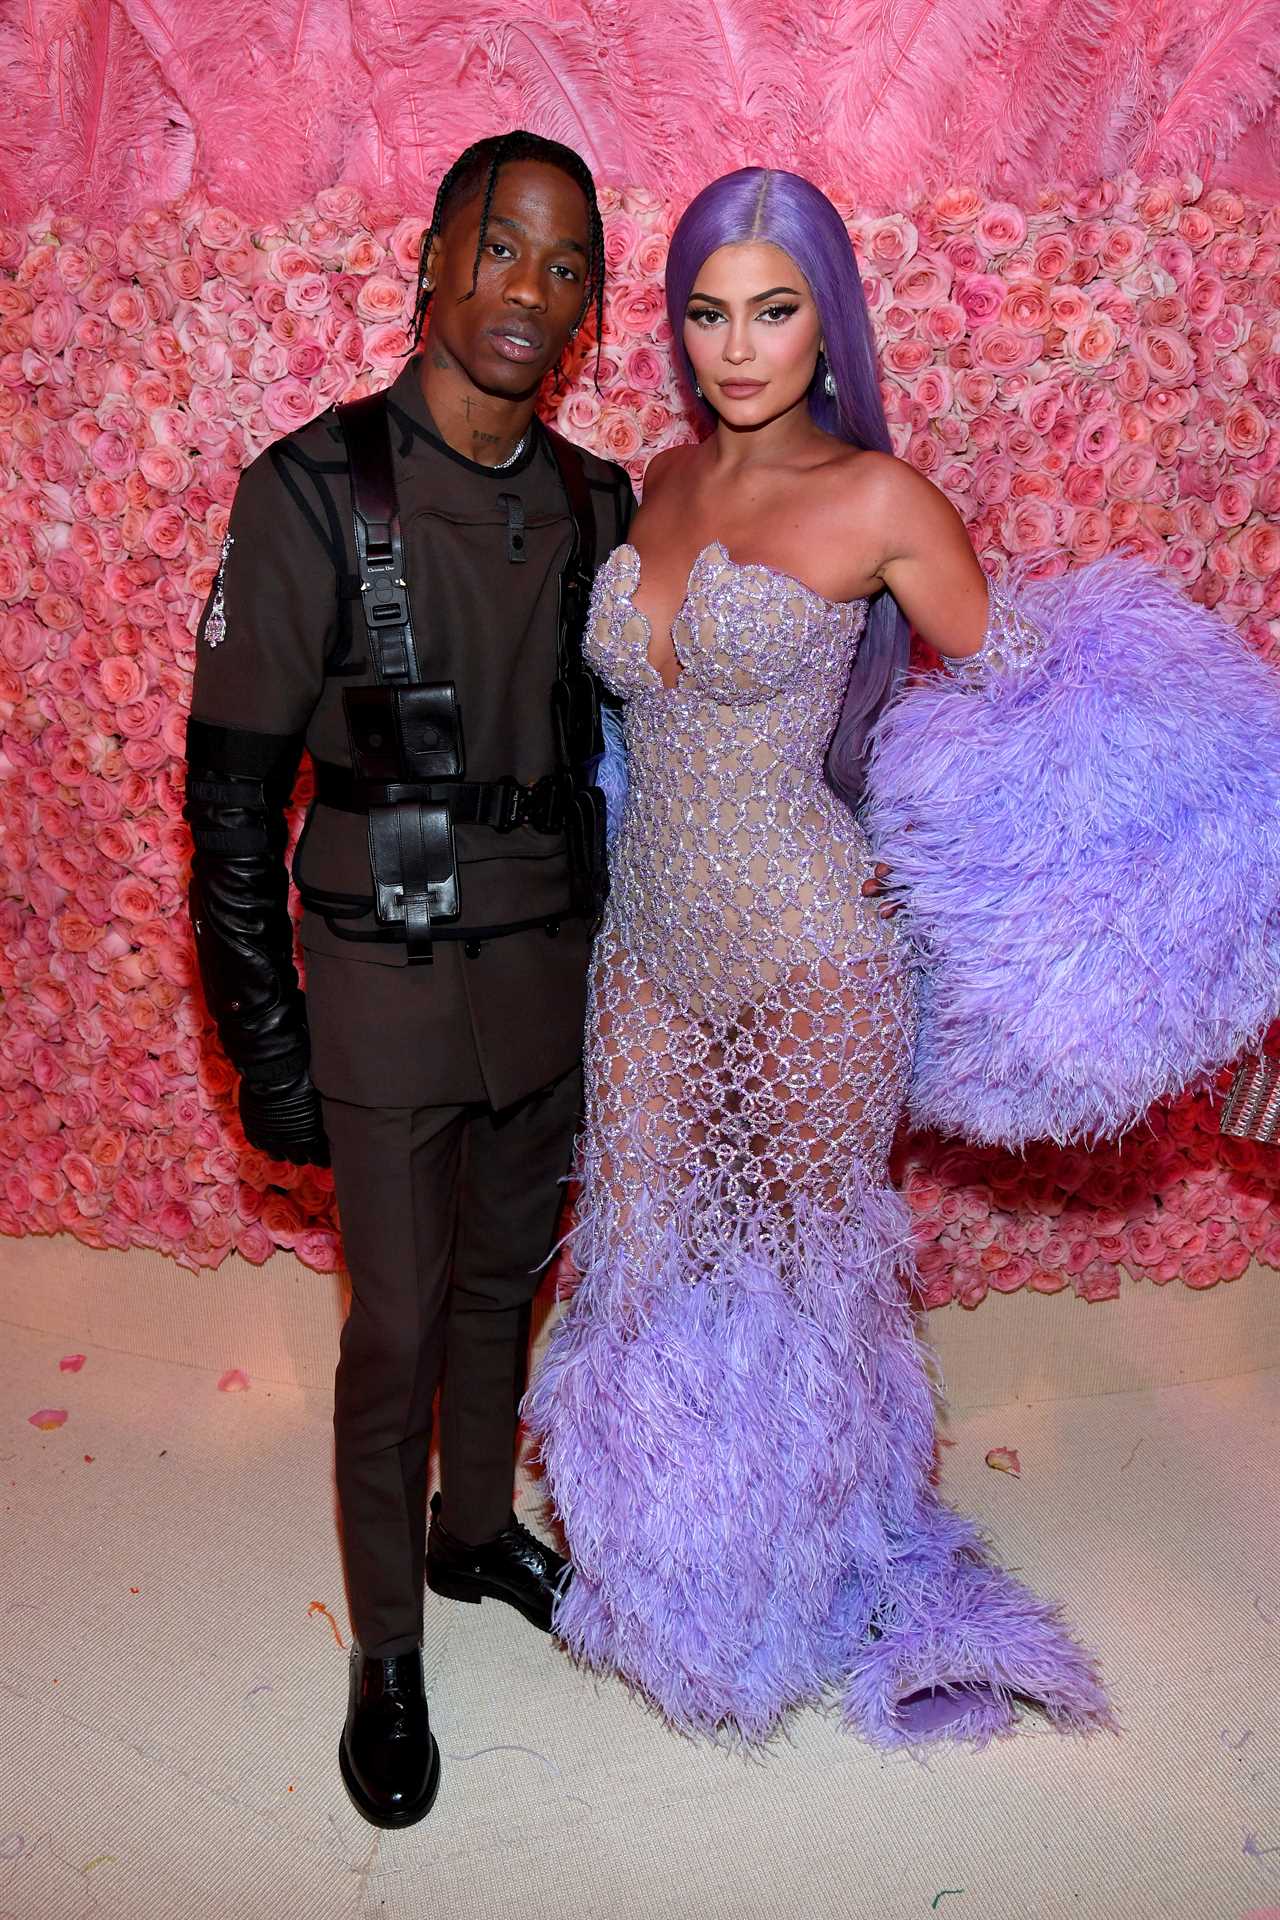 Kylie Jenner’s ex-boyfriend Travis Scott snubs star’s first post of their son as fans think ‘something big’ led to split